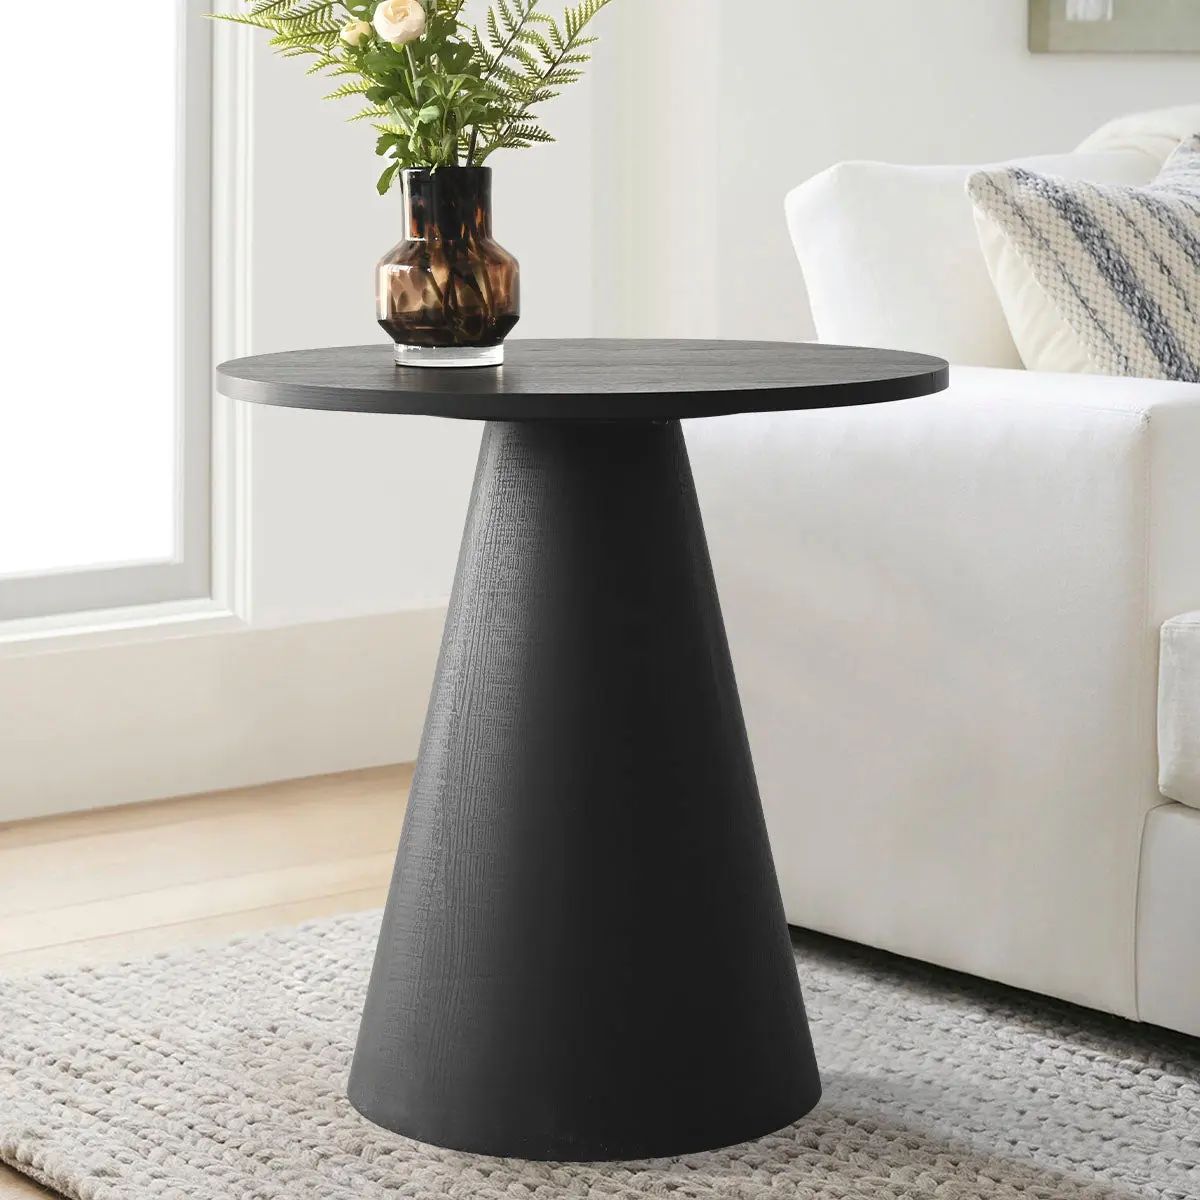 Dwen 24” Wooden Round Side Table | The Pop Maison